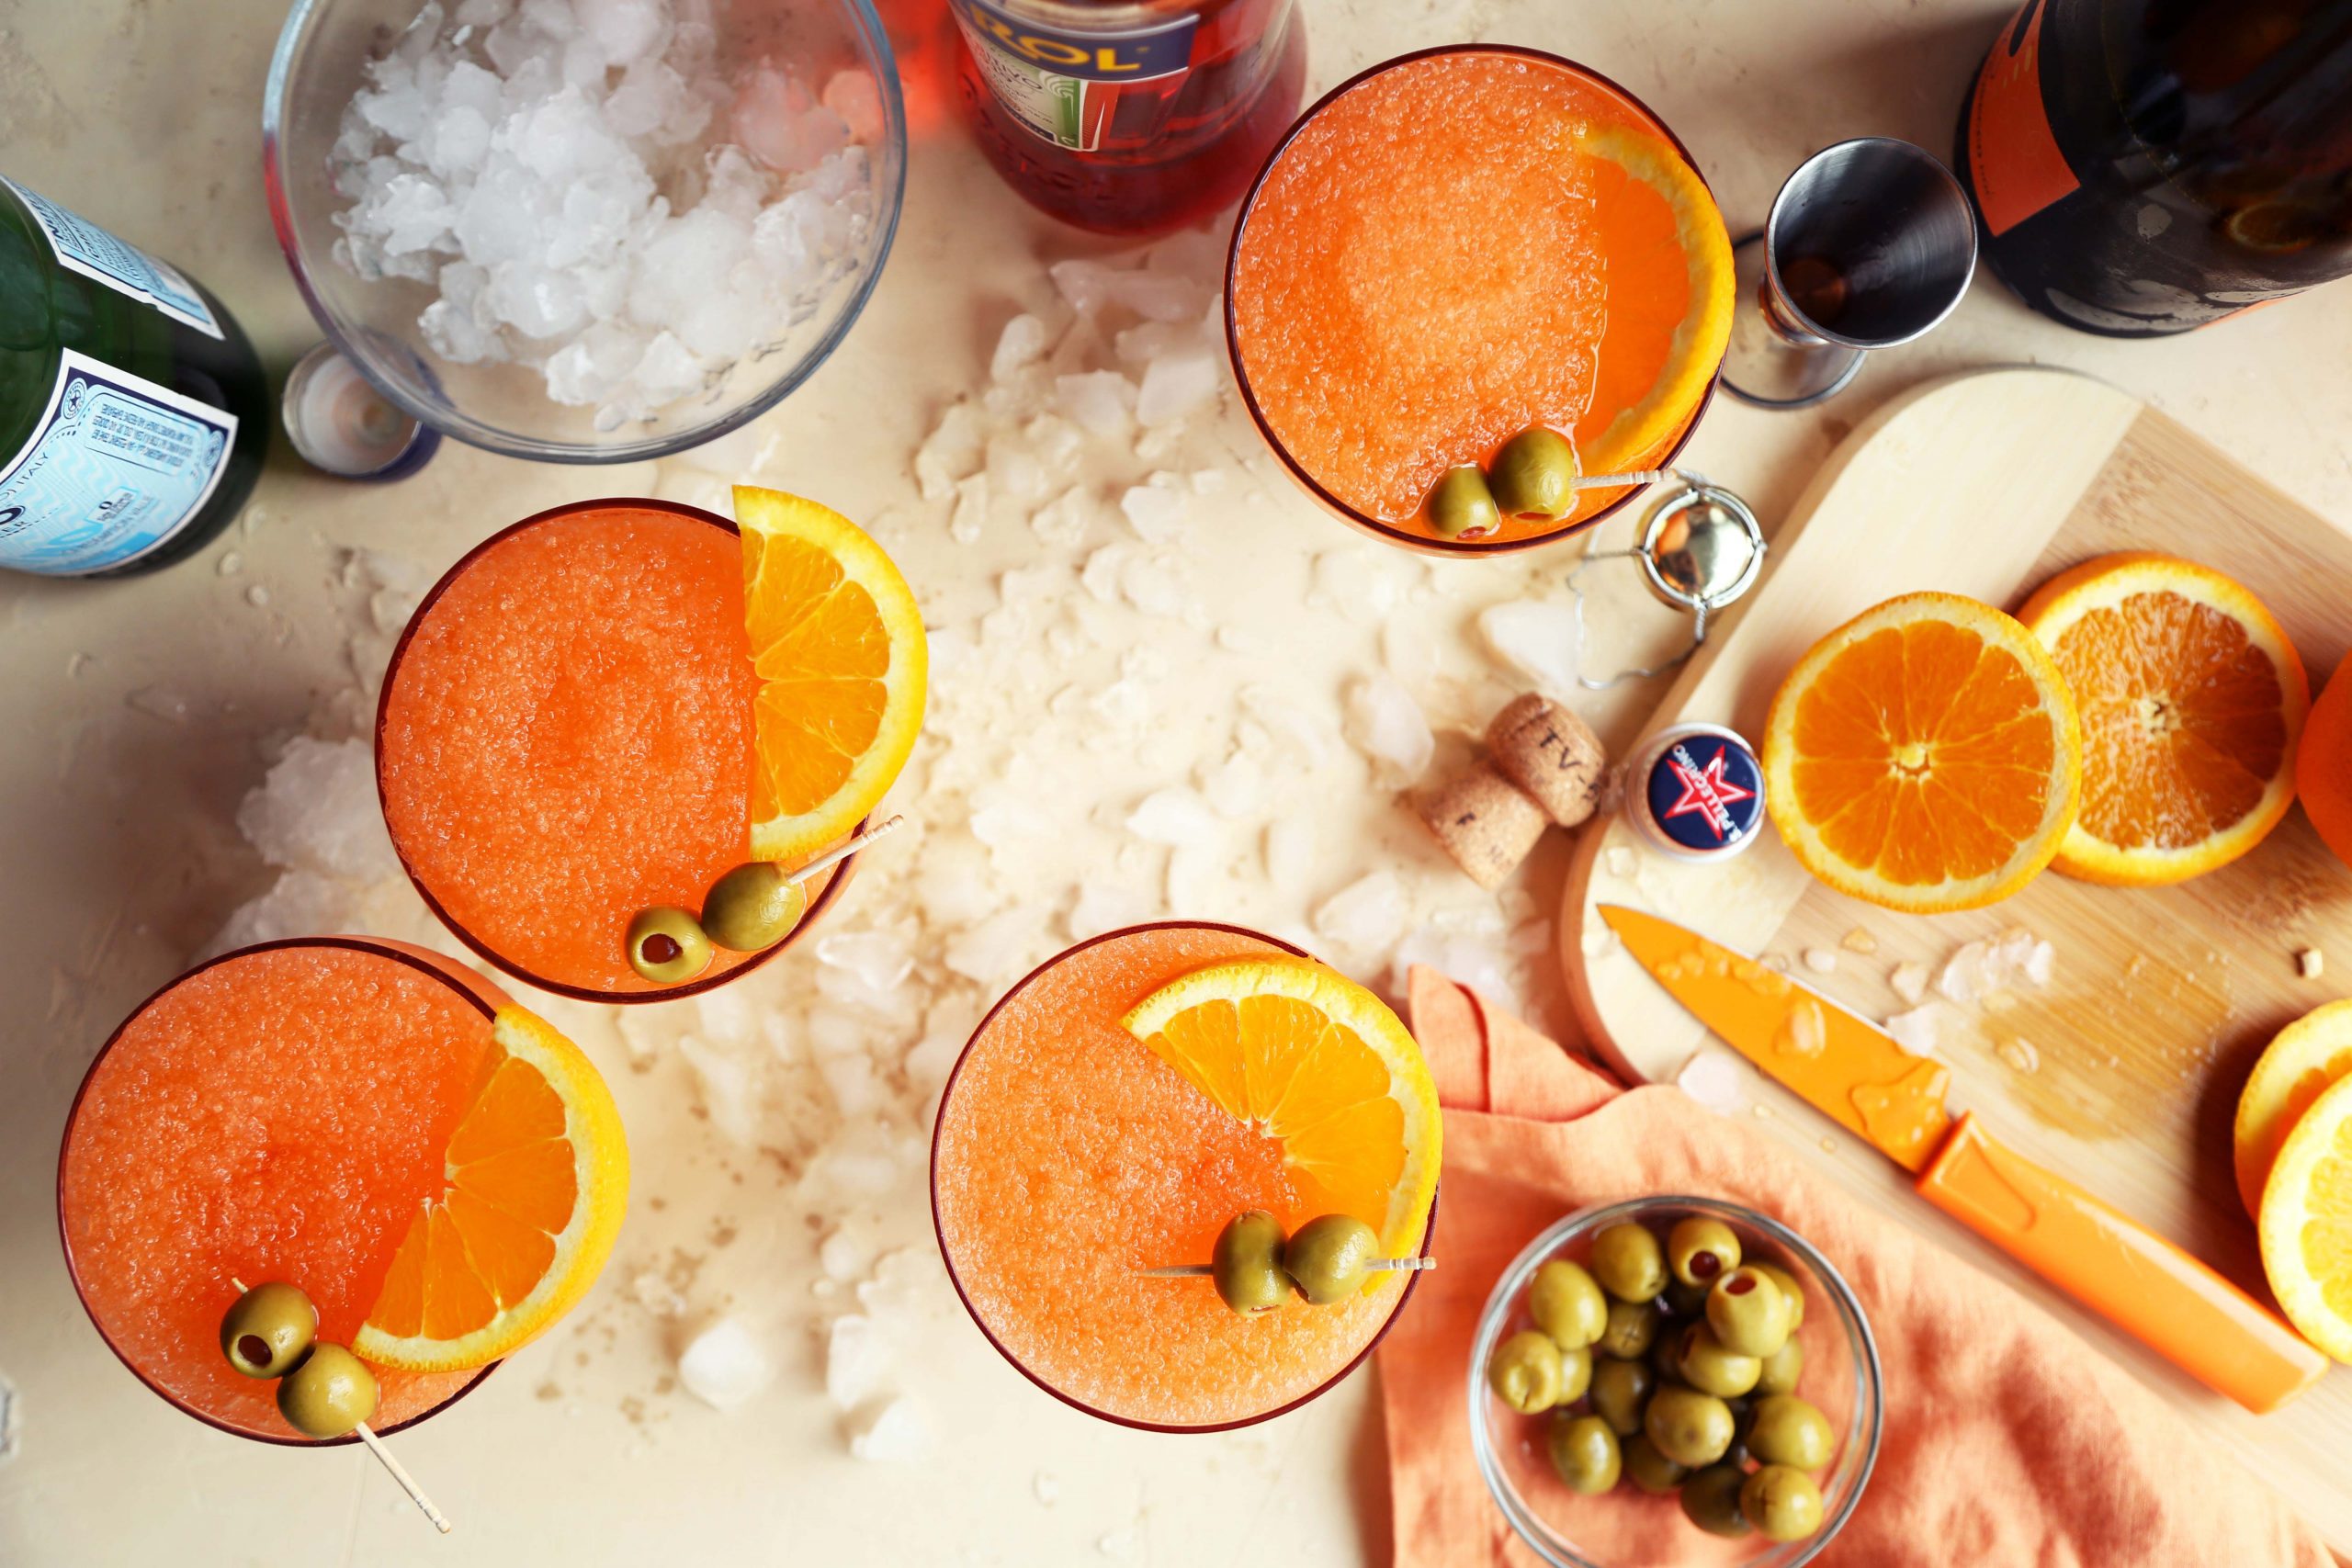 Frozen Aperol Spritz with Strawberries • Sunday Table